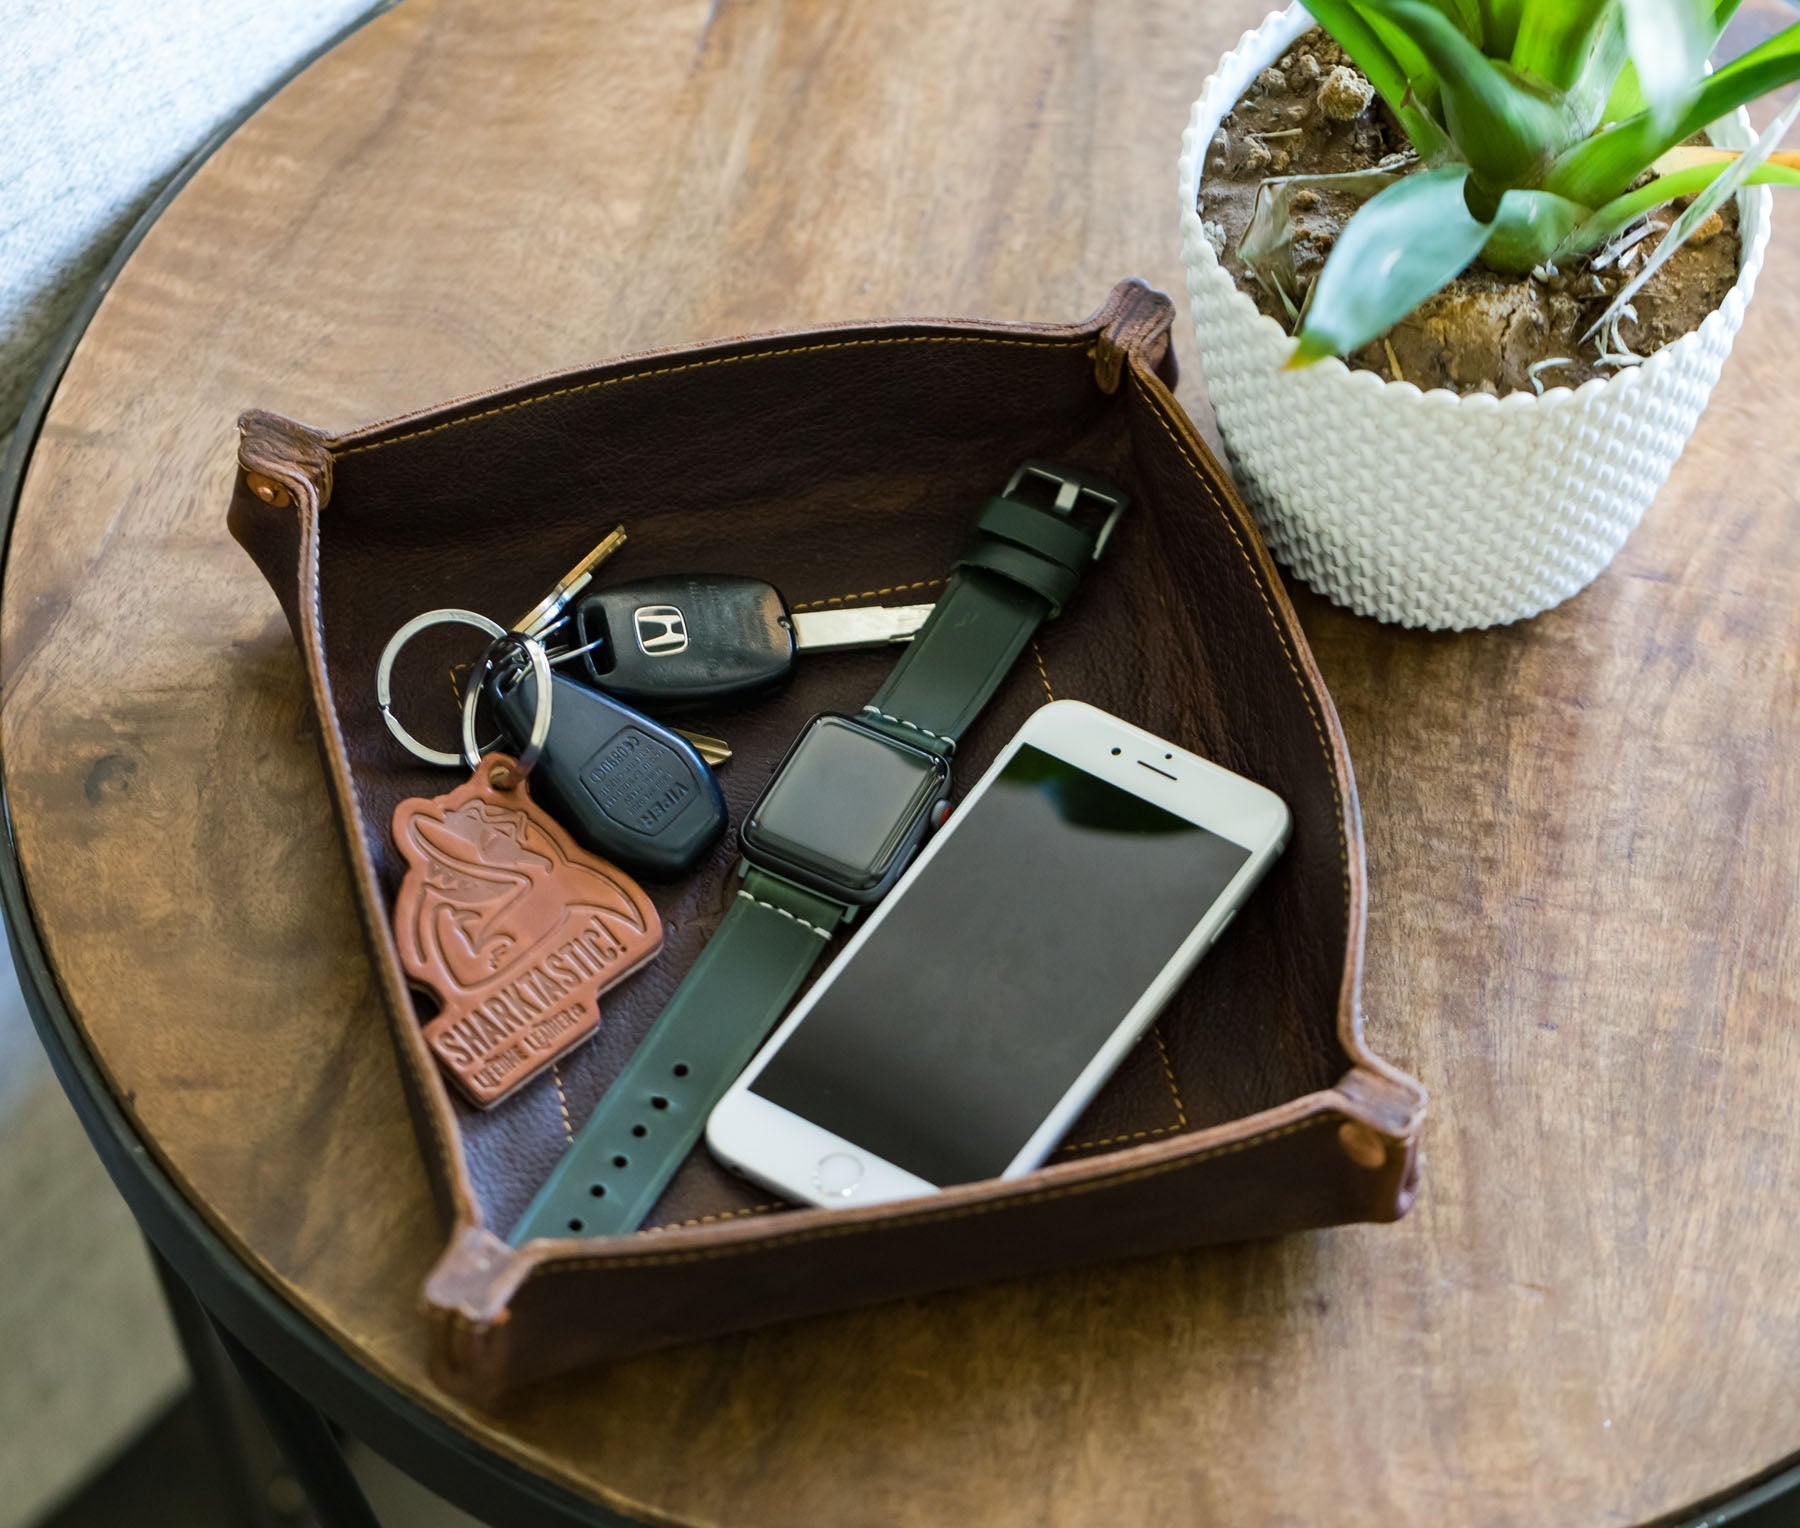 Rivet Valet Tray by Lifetime Leather Co